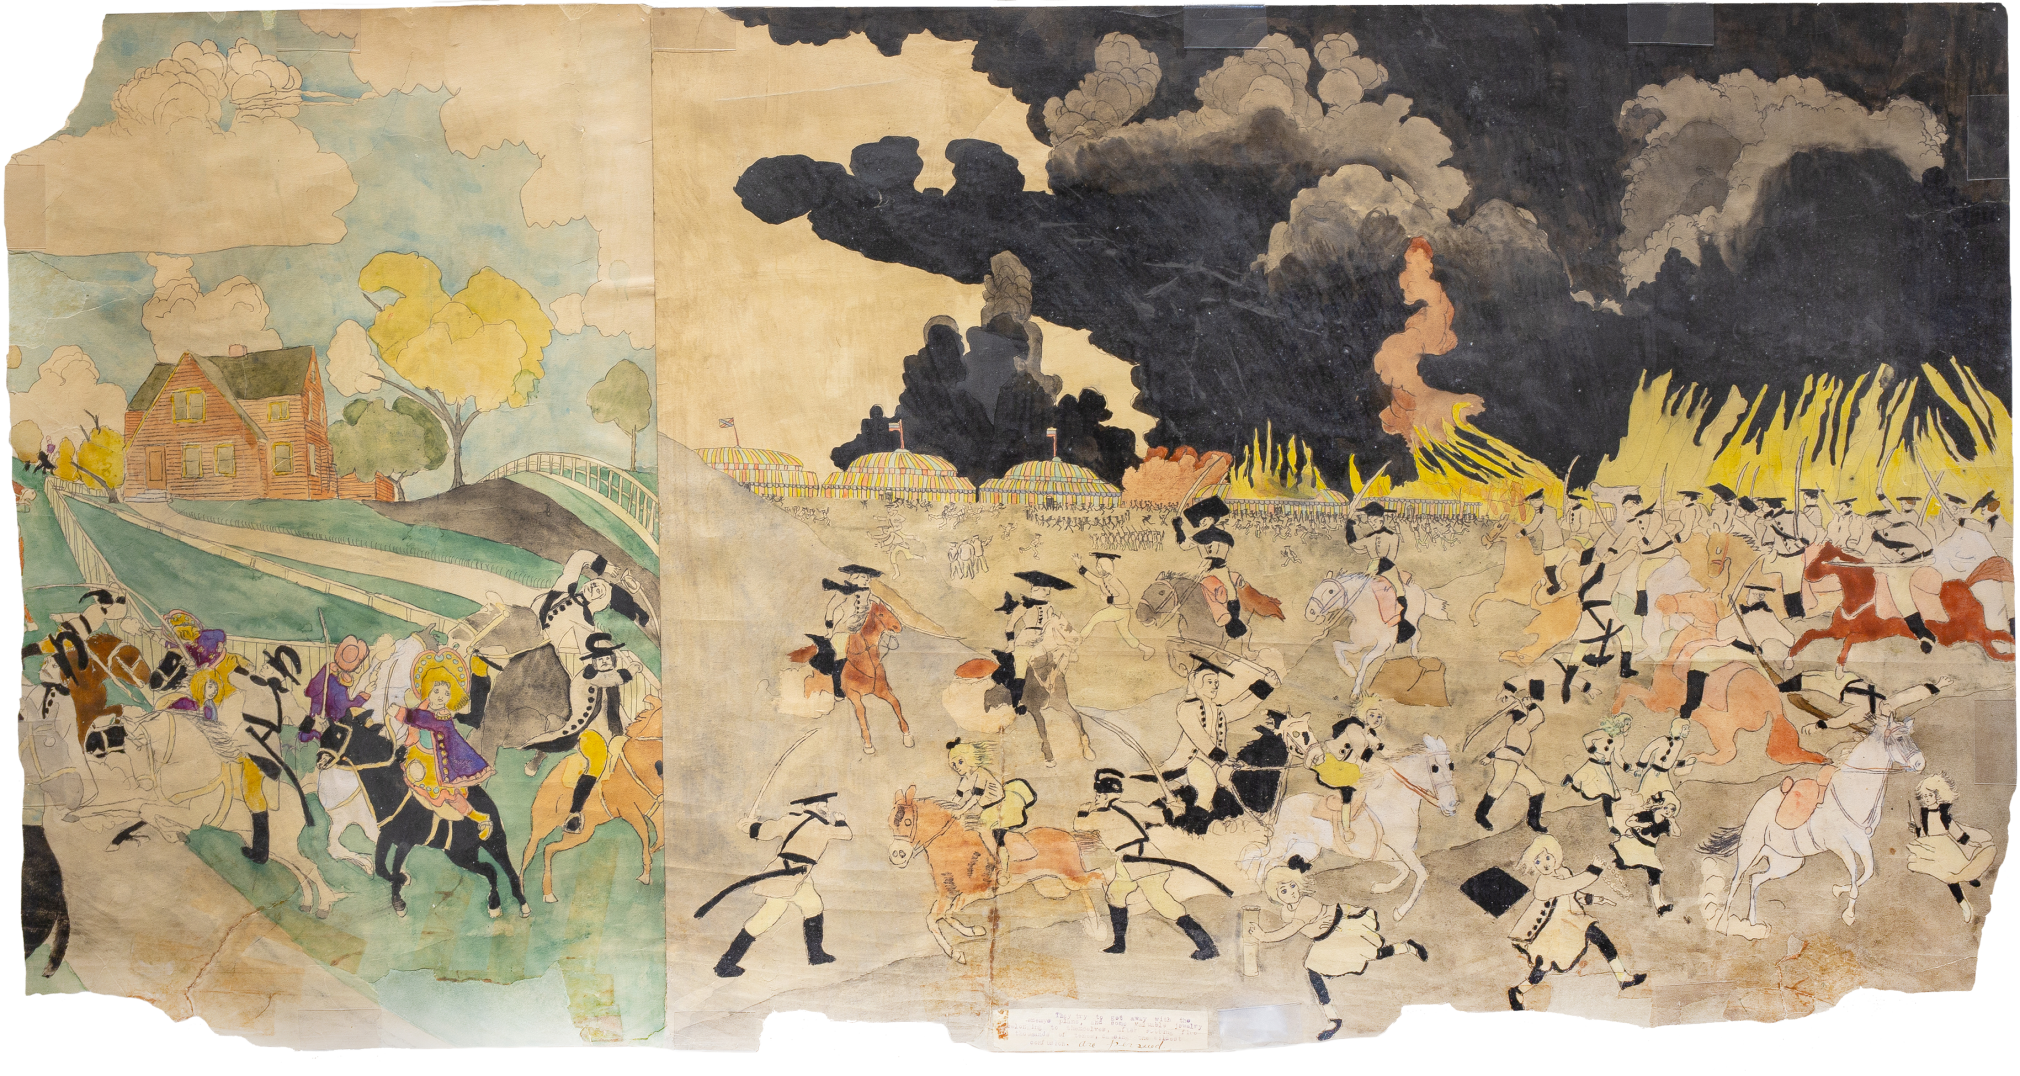 Henry Darger - Artists - Andrew Edlin Gallery